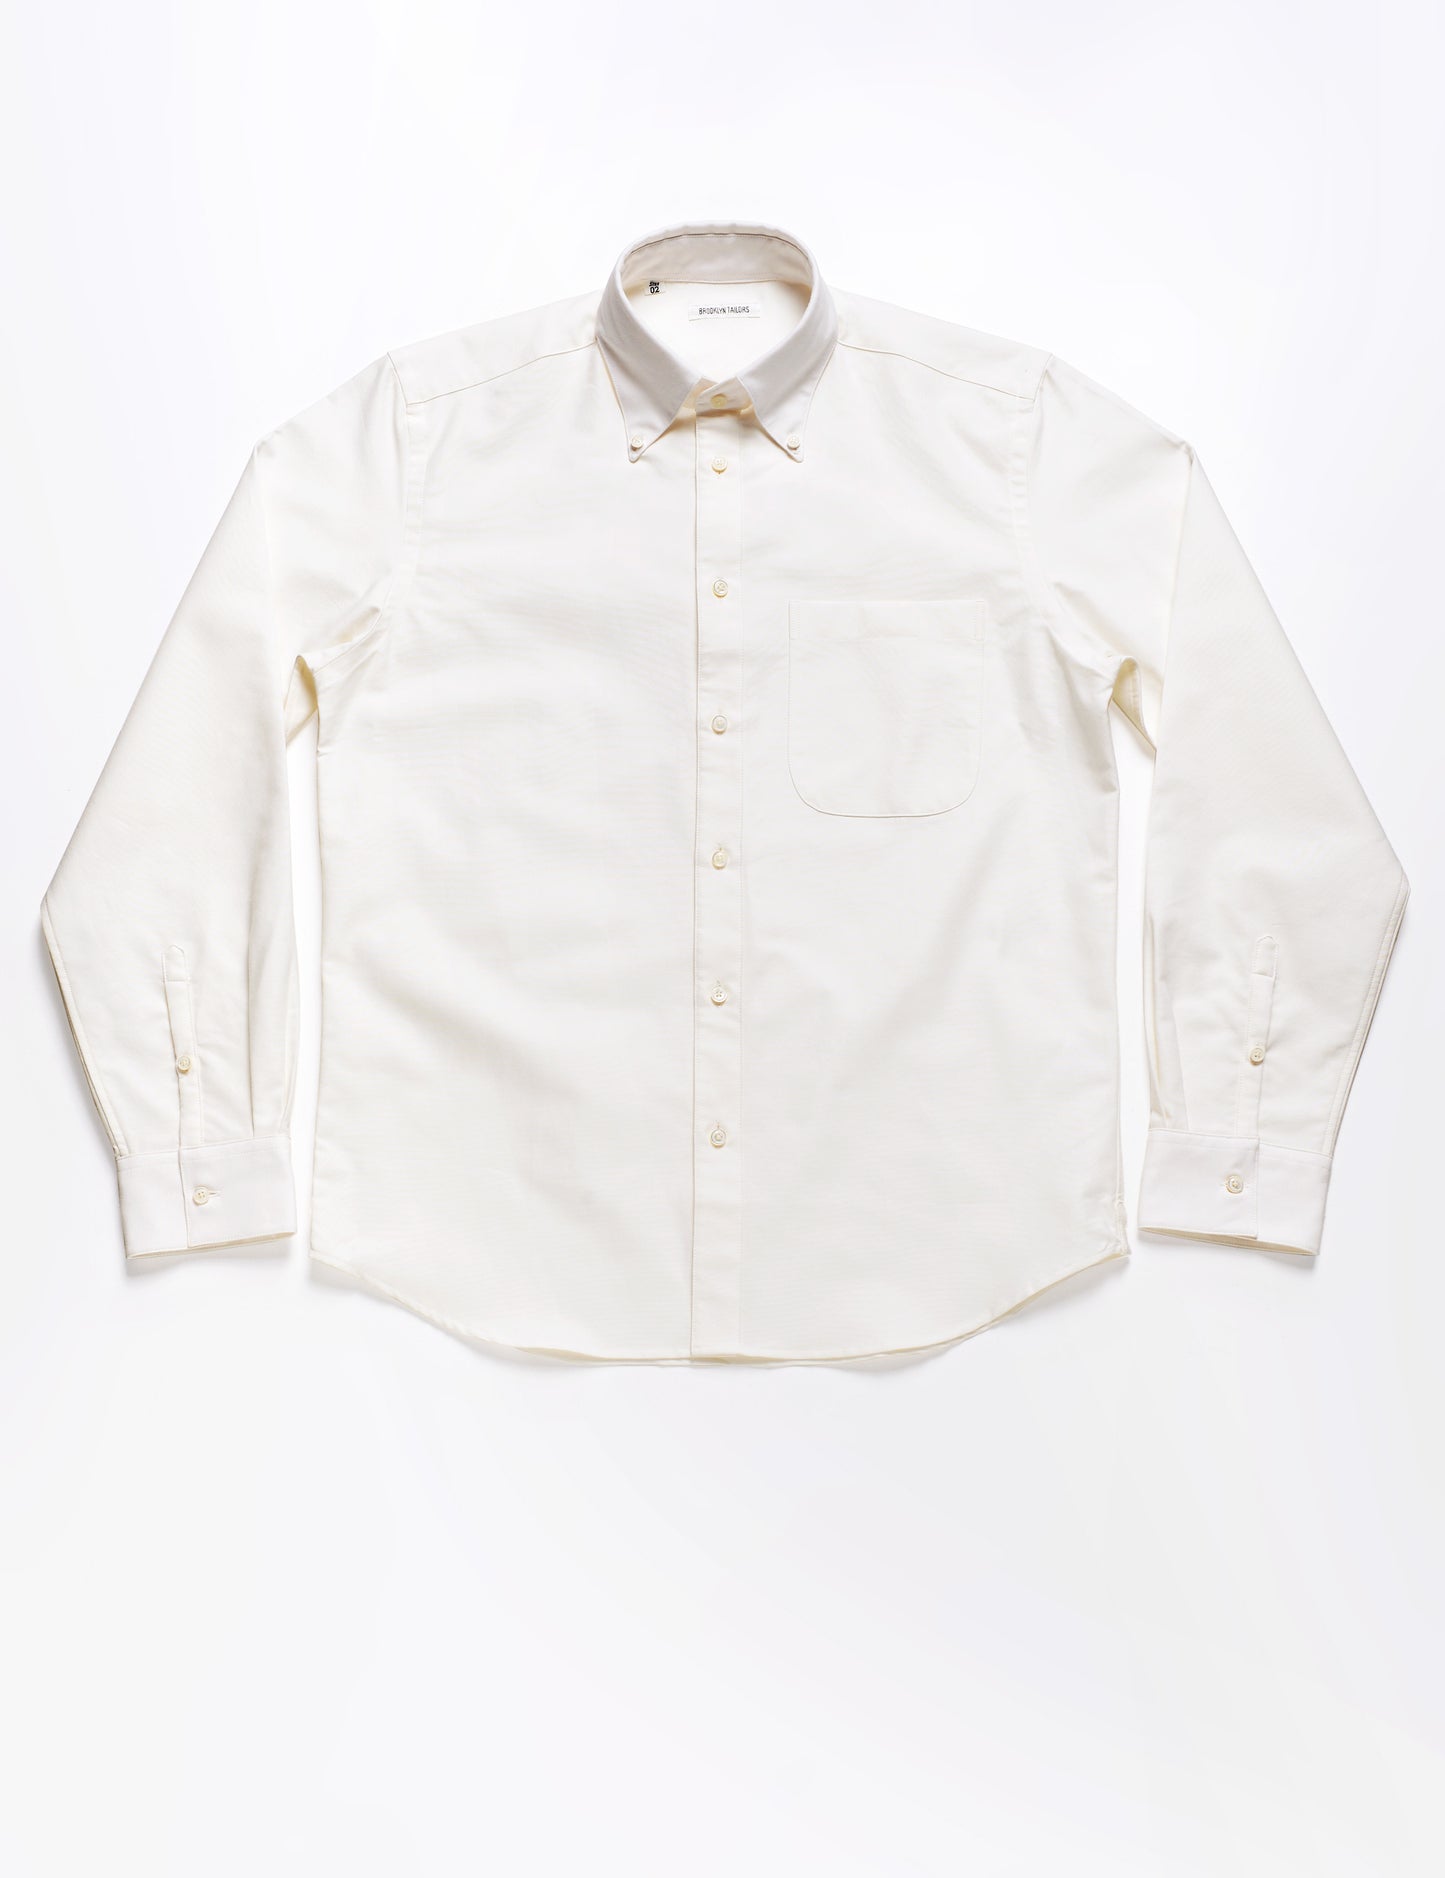 BKT14 Relaxed Shirt in Oxford - Natural White